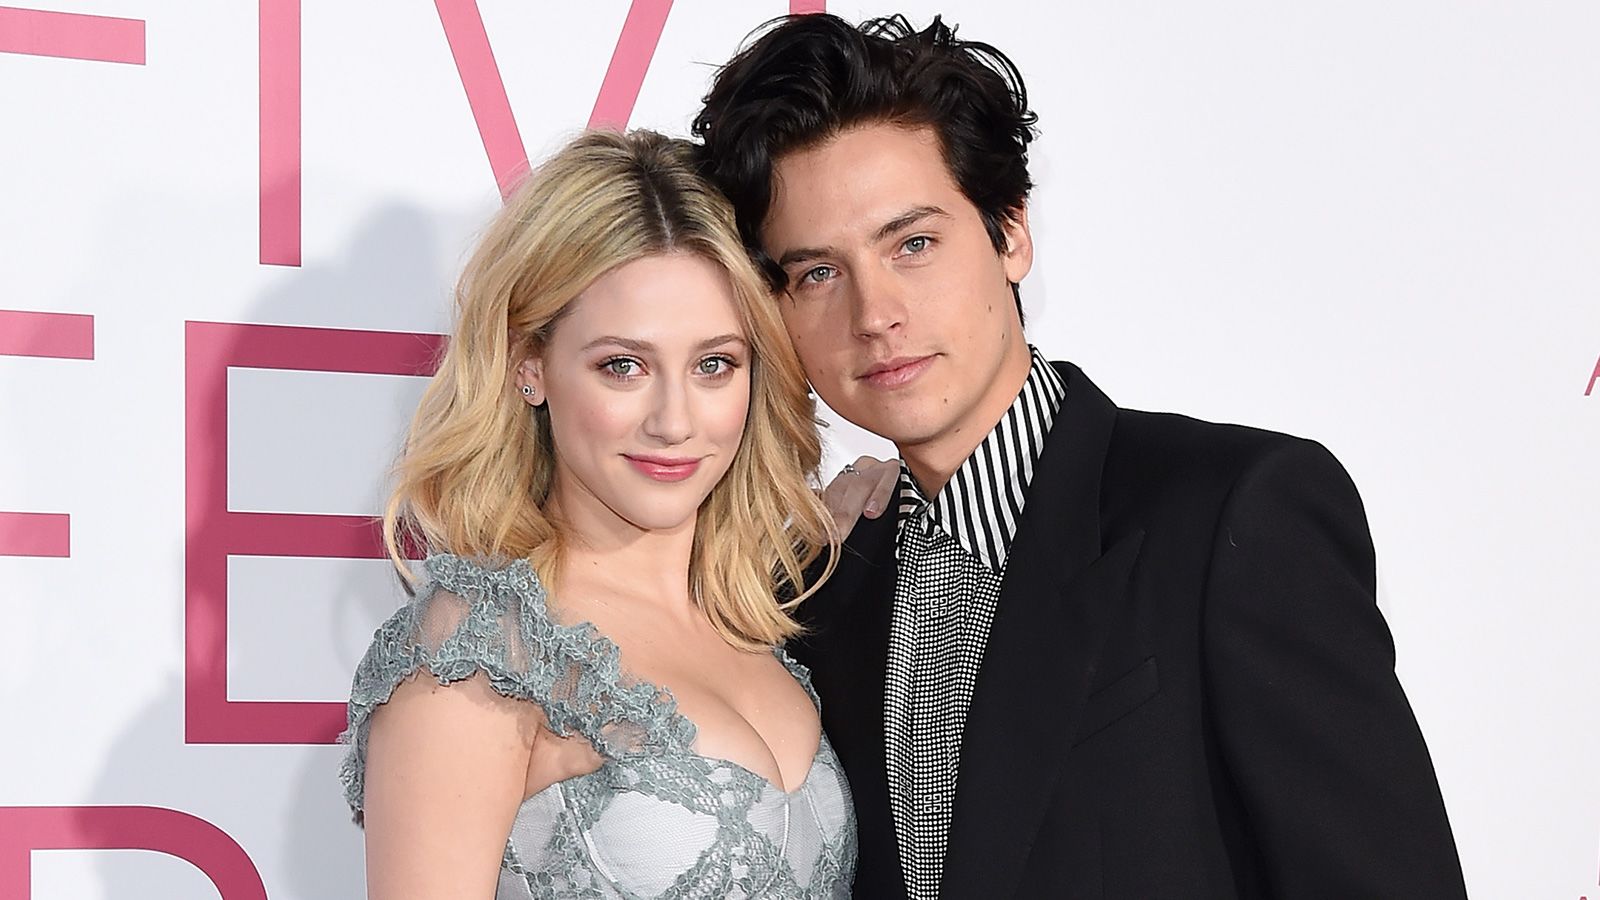 Cole Sprouse talks Lili Reinhart romance and being cheated on | CNN